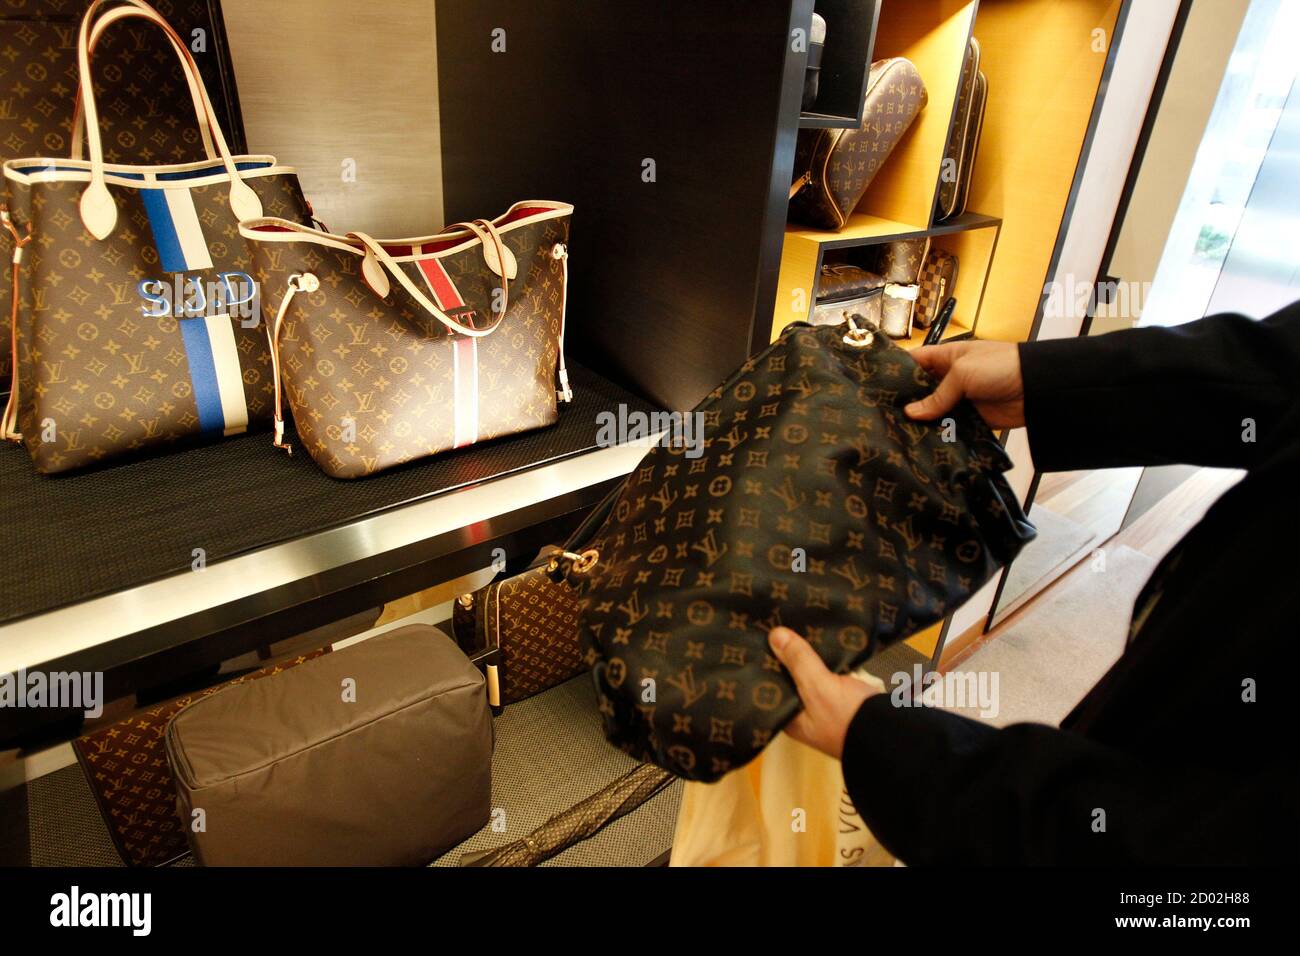 A fake LVMH handbag (R) purchased shipped from China -ased online is pictured next to products on display at a Louis Vuitton store in Chevy Chase, Maryland, October 5,